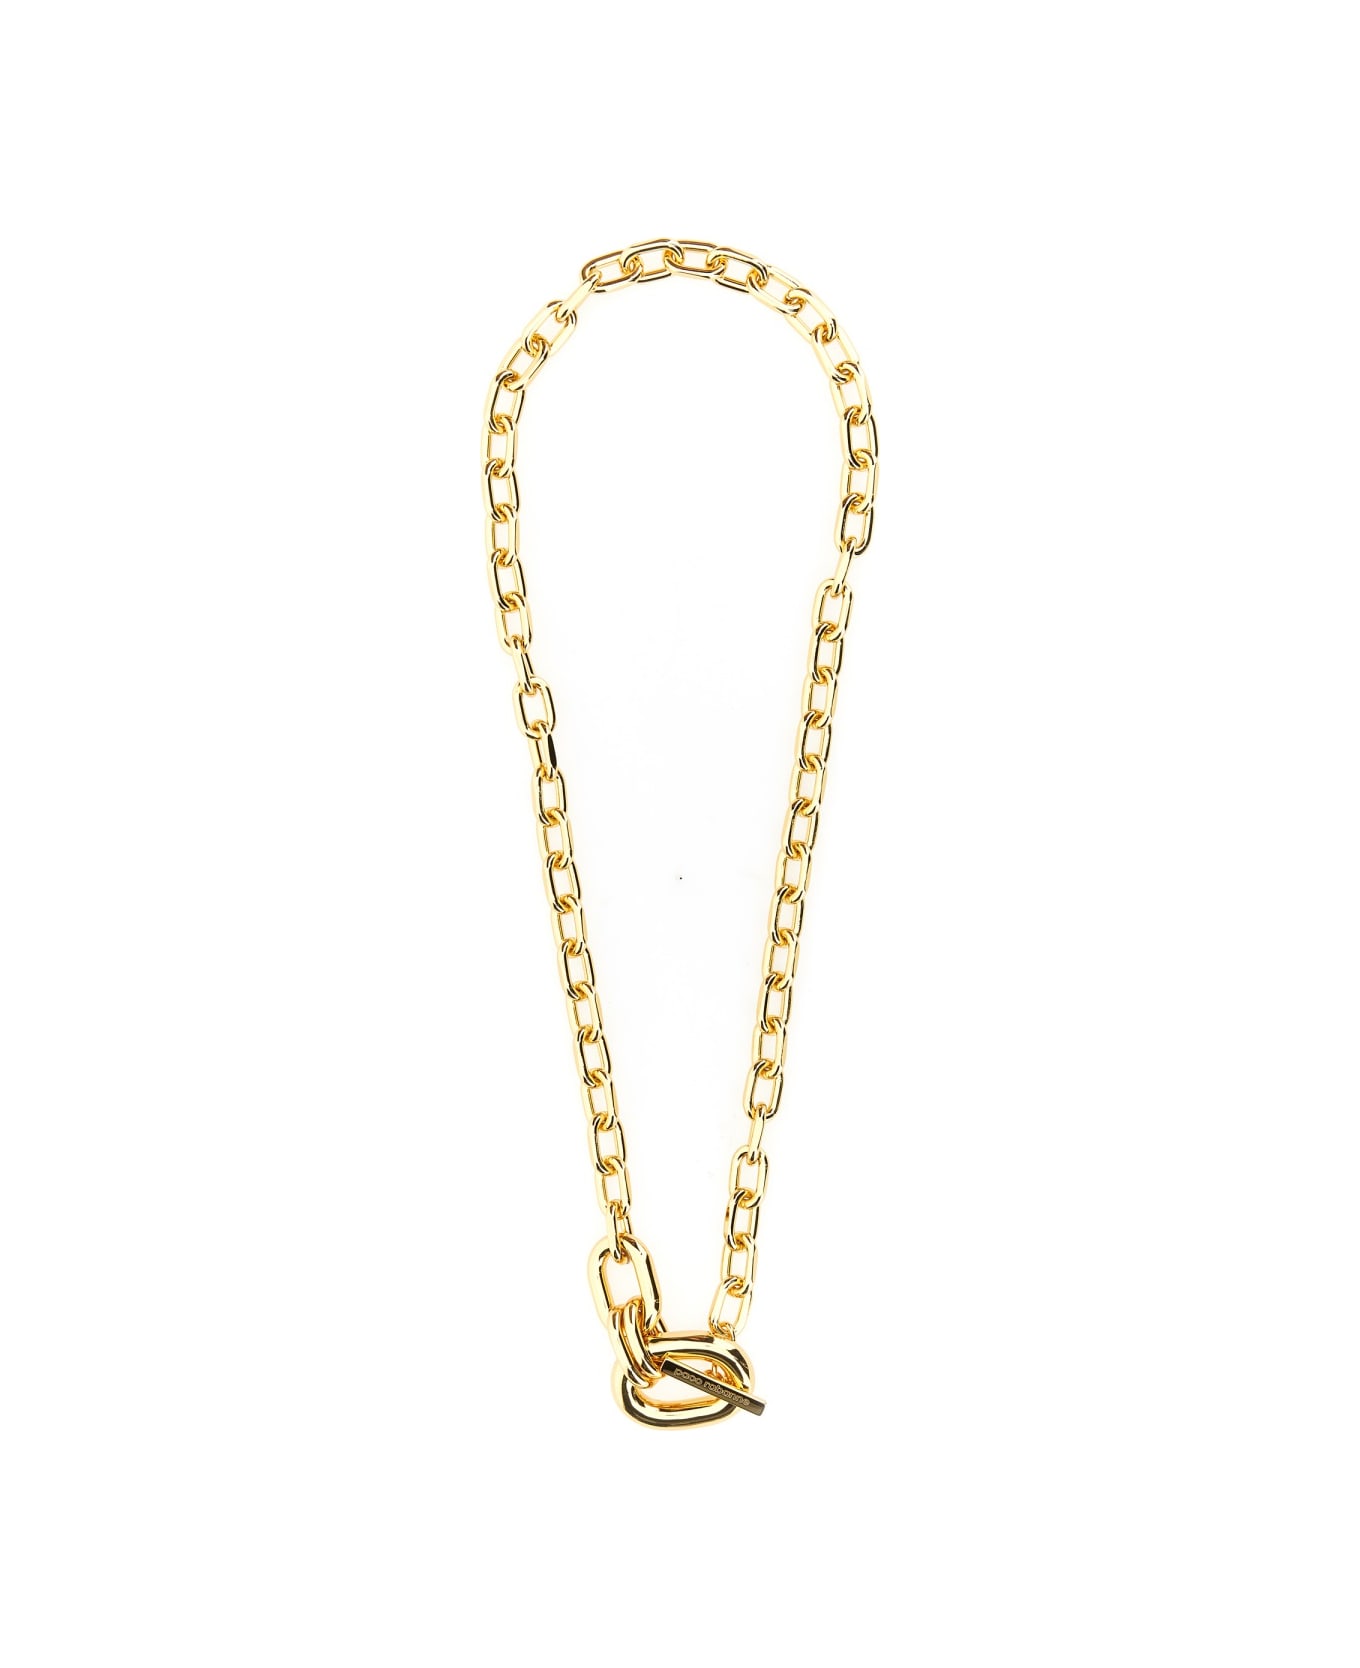 Paco Rabanne Chain Necklace - GOLD